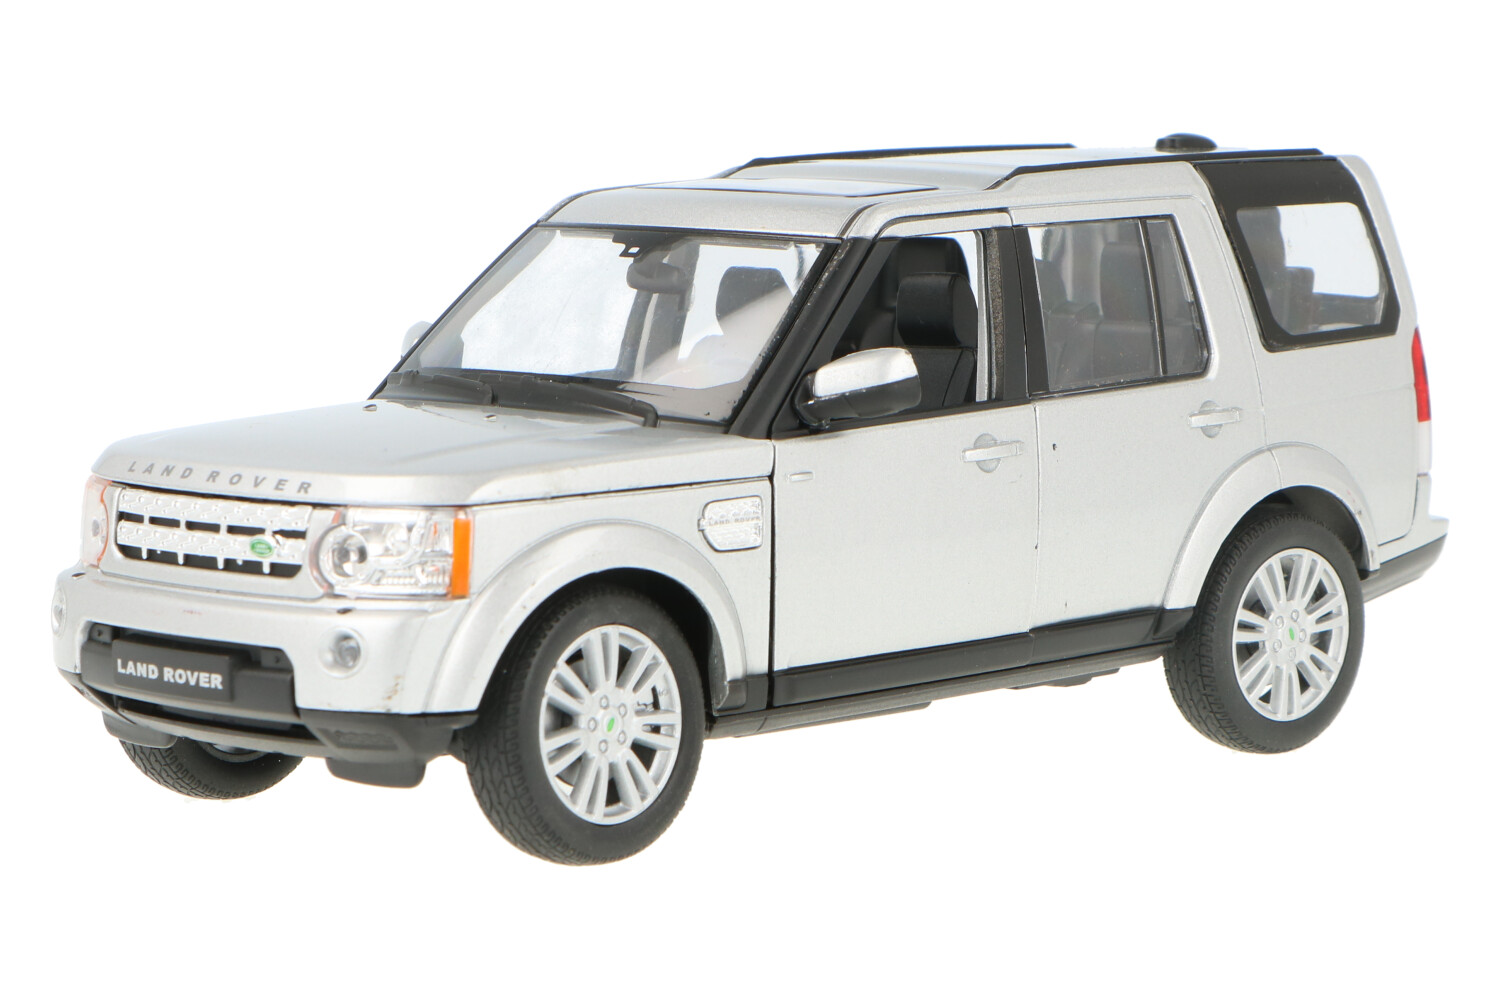 Land Rover Discovery 4 - Modelauto schaal 1:24